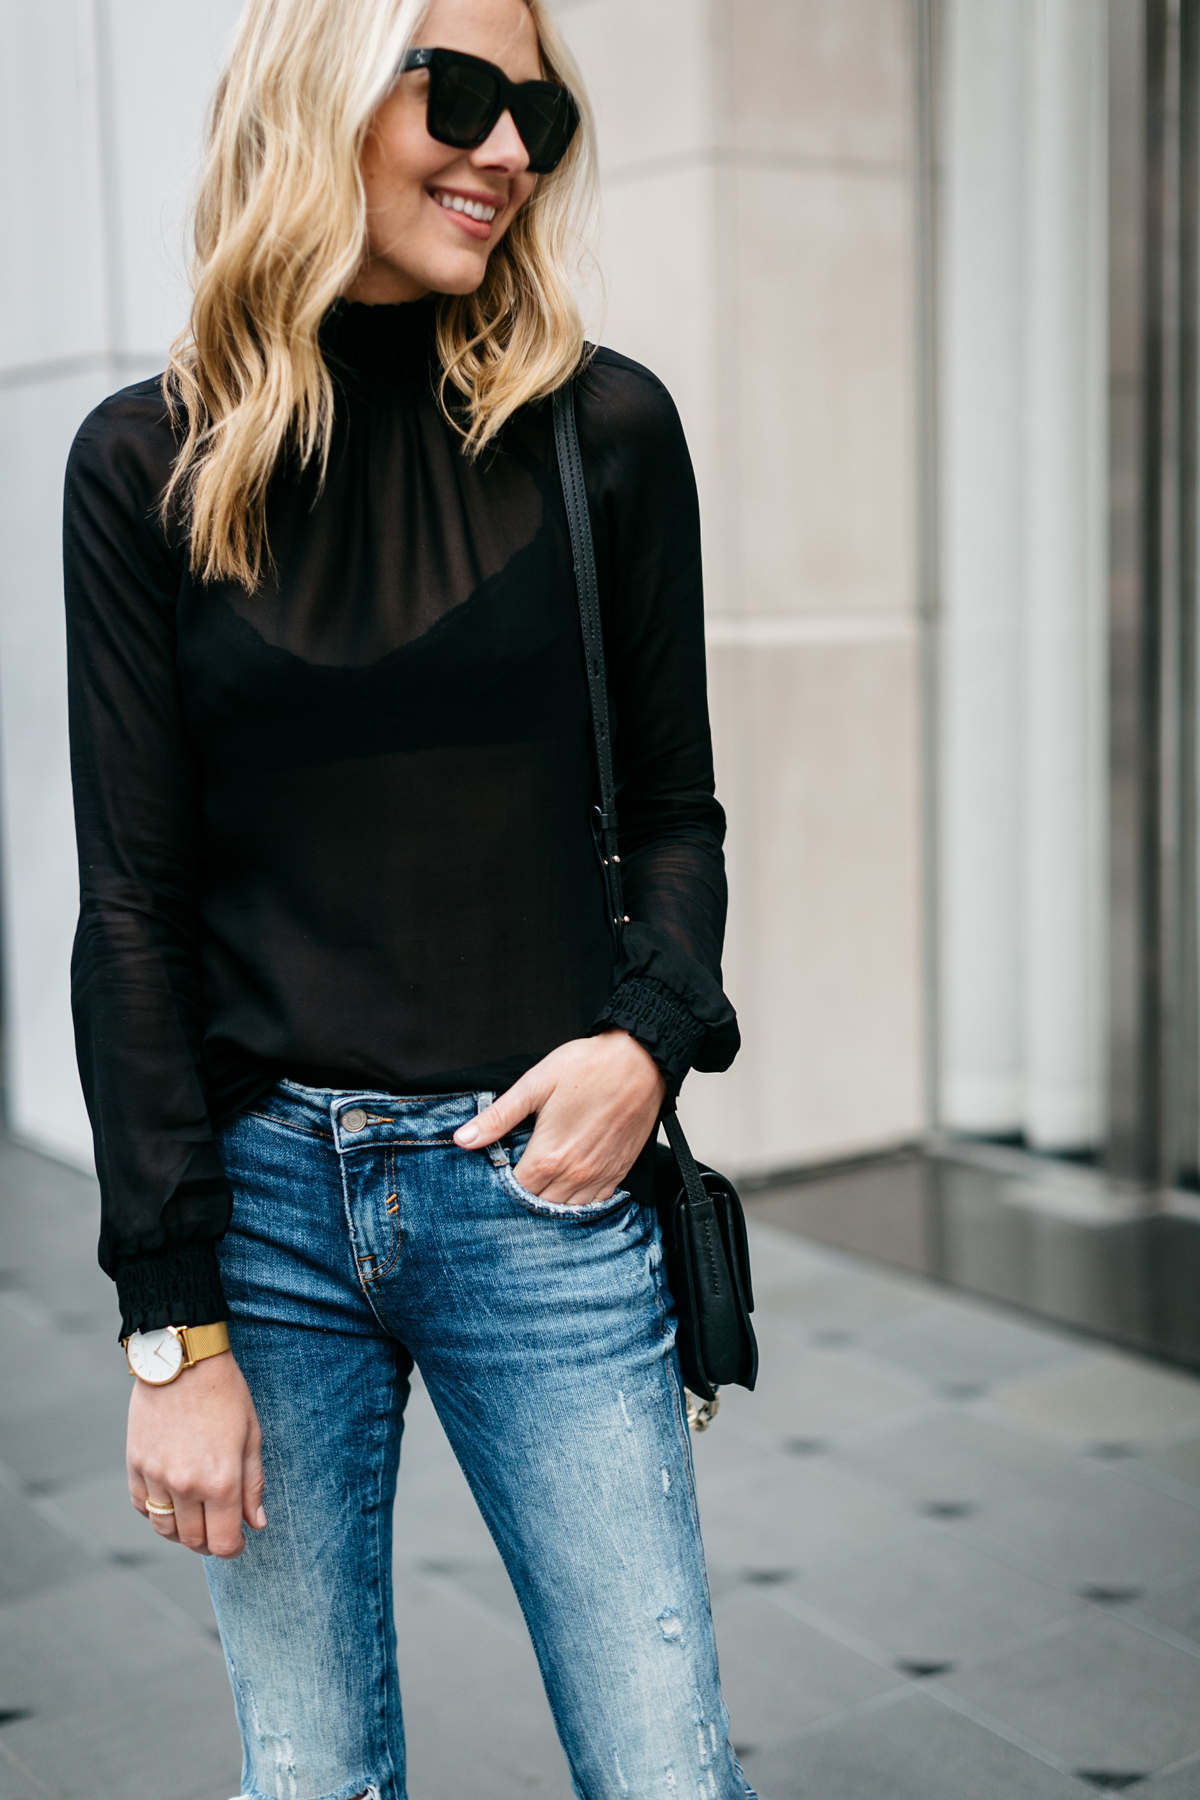 Fall Outfit, Black Long Sleeve Sheer Top, Denim Ripped Skinny Jeans